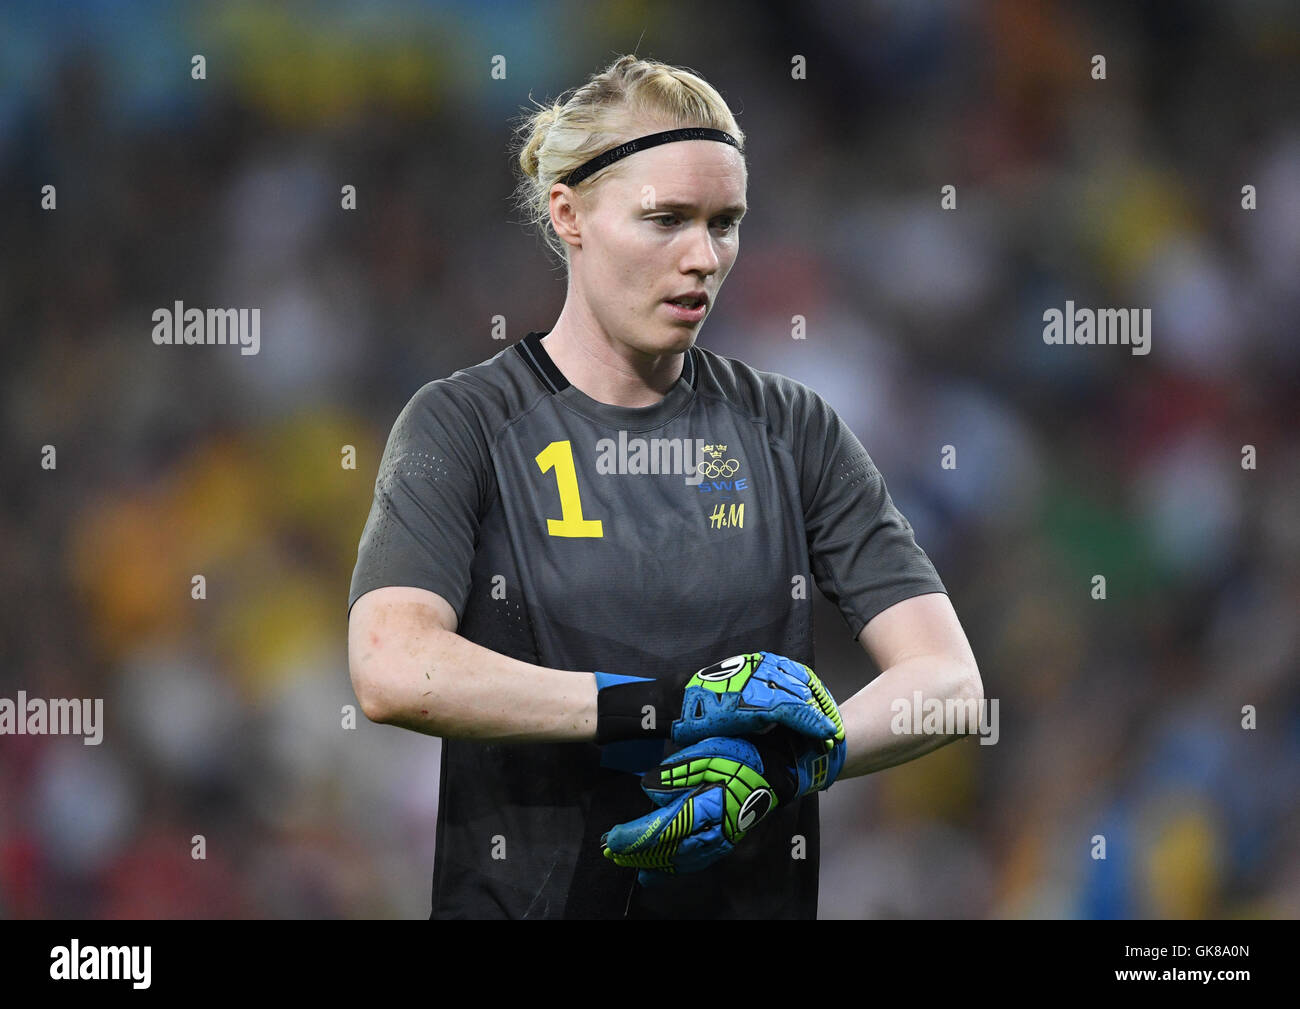 Rio de Janeiro, Brazil. 19th Aug, 2016. Goalkeeper Hedvig Lindahl of Sweden reacts during the Women's soccer Gold Medal Match between Sweden and Germany during the Rio 2016 Olympic Games at the Maracana in Rio de Janeiro, Brazil, 19 August 2016. Photo: Soeren Stache/dpa/Alamy Live News Stock Photo